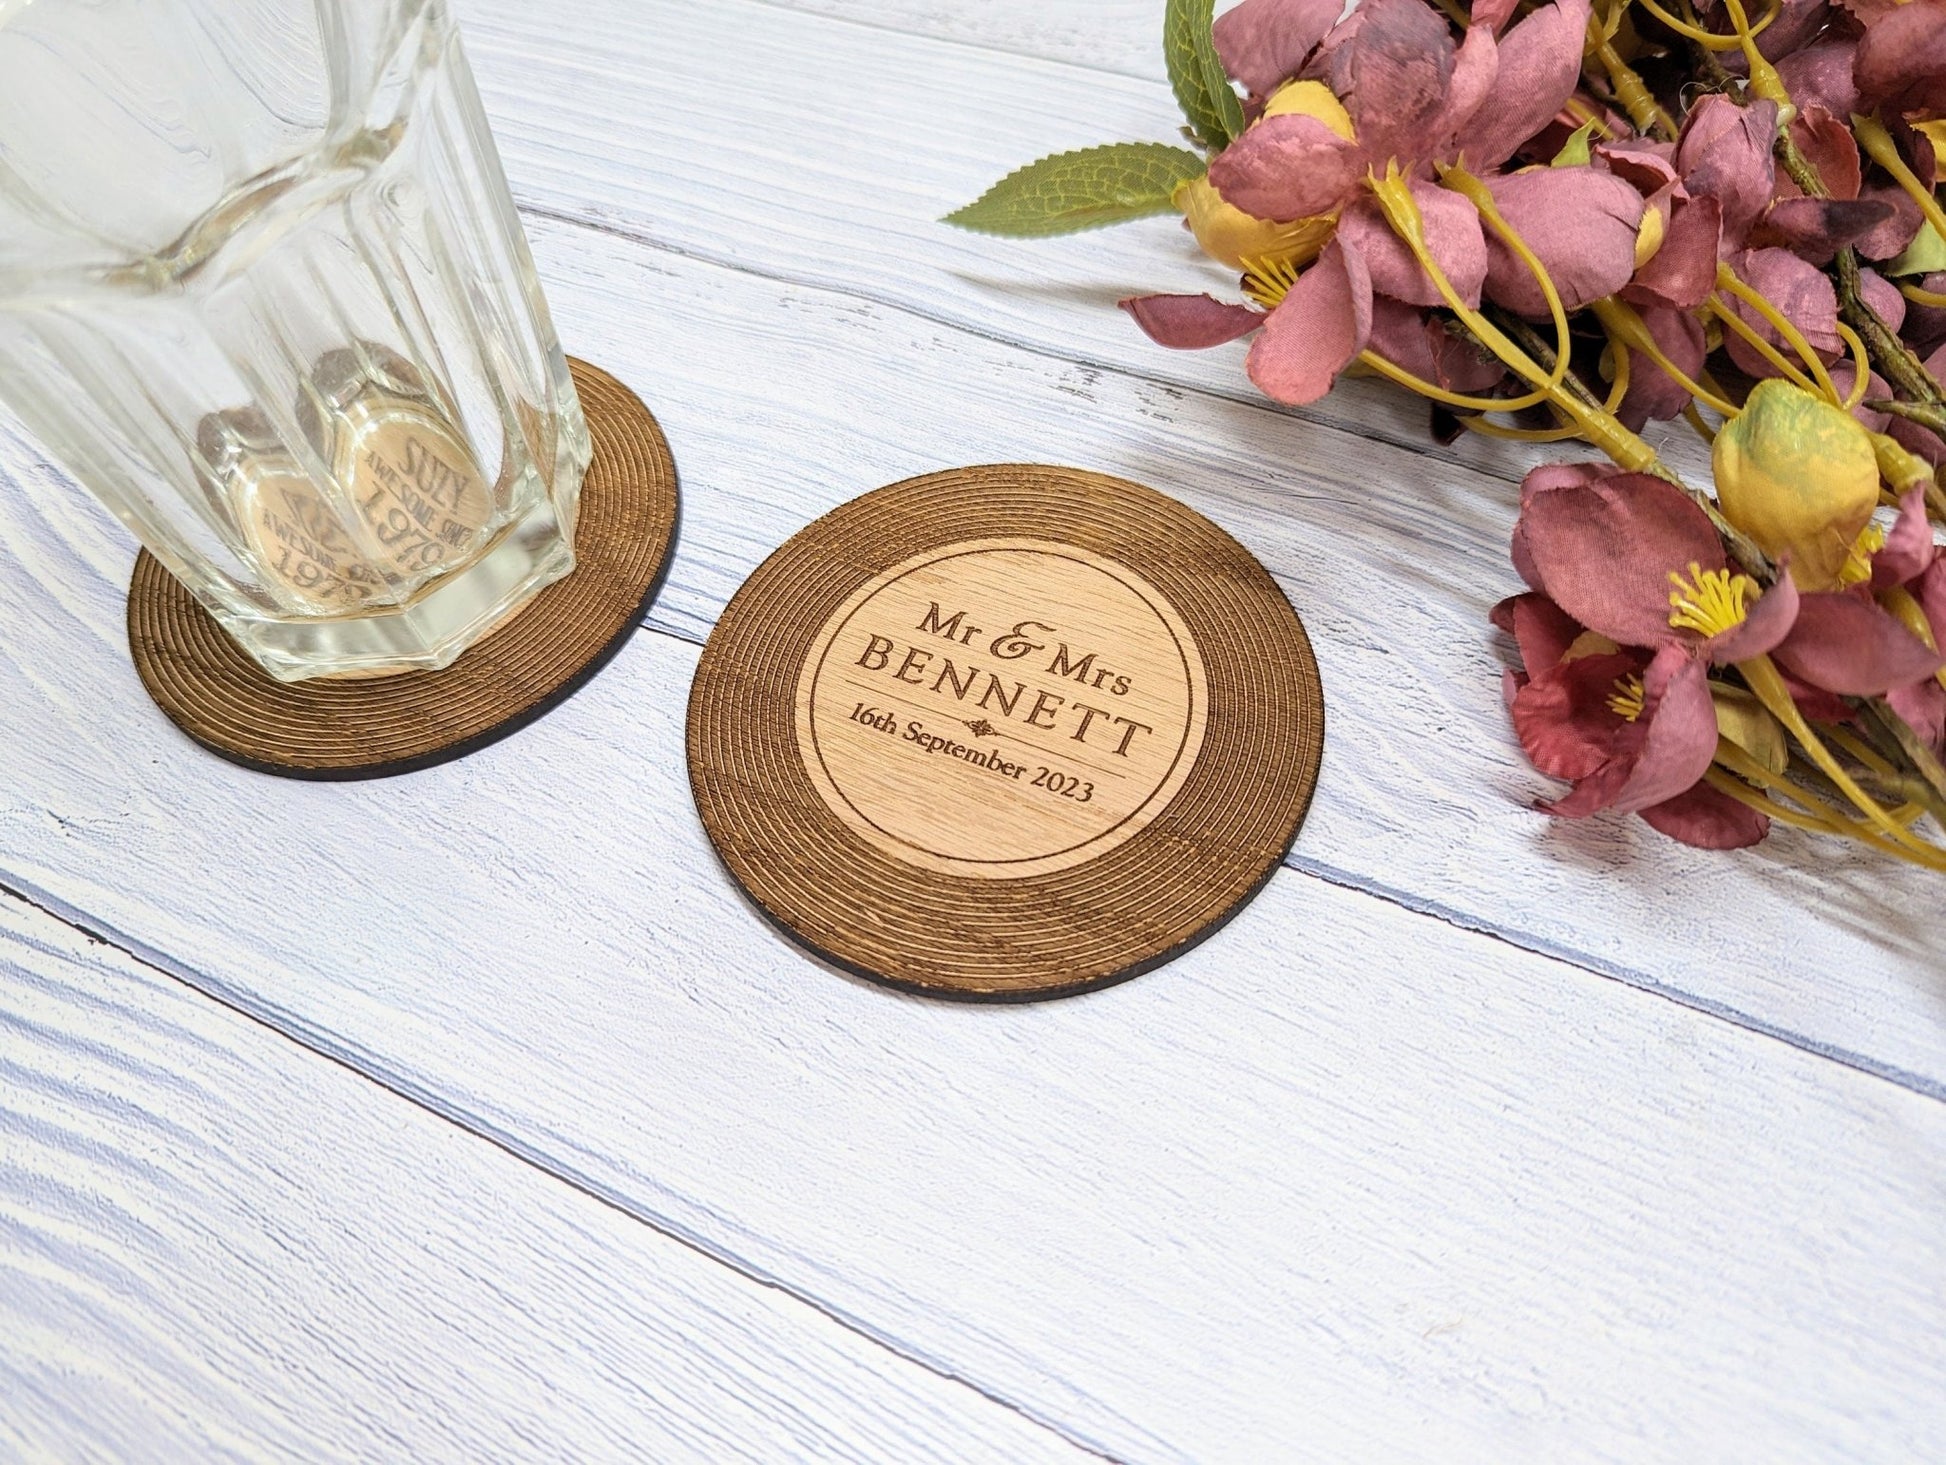 Personalised Retro Vinyl Record Wedding Coaster - "Mr & Mrs [Name], [Wedding Date]" - Unique Newlywed Gift for Music Lovers - CherryGroveCraft